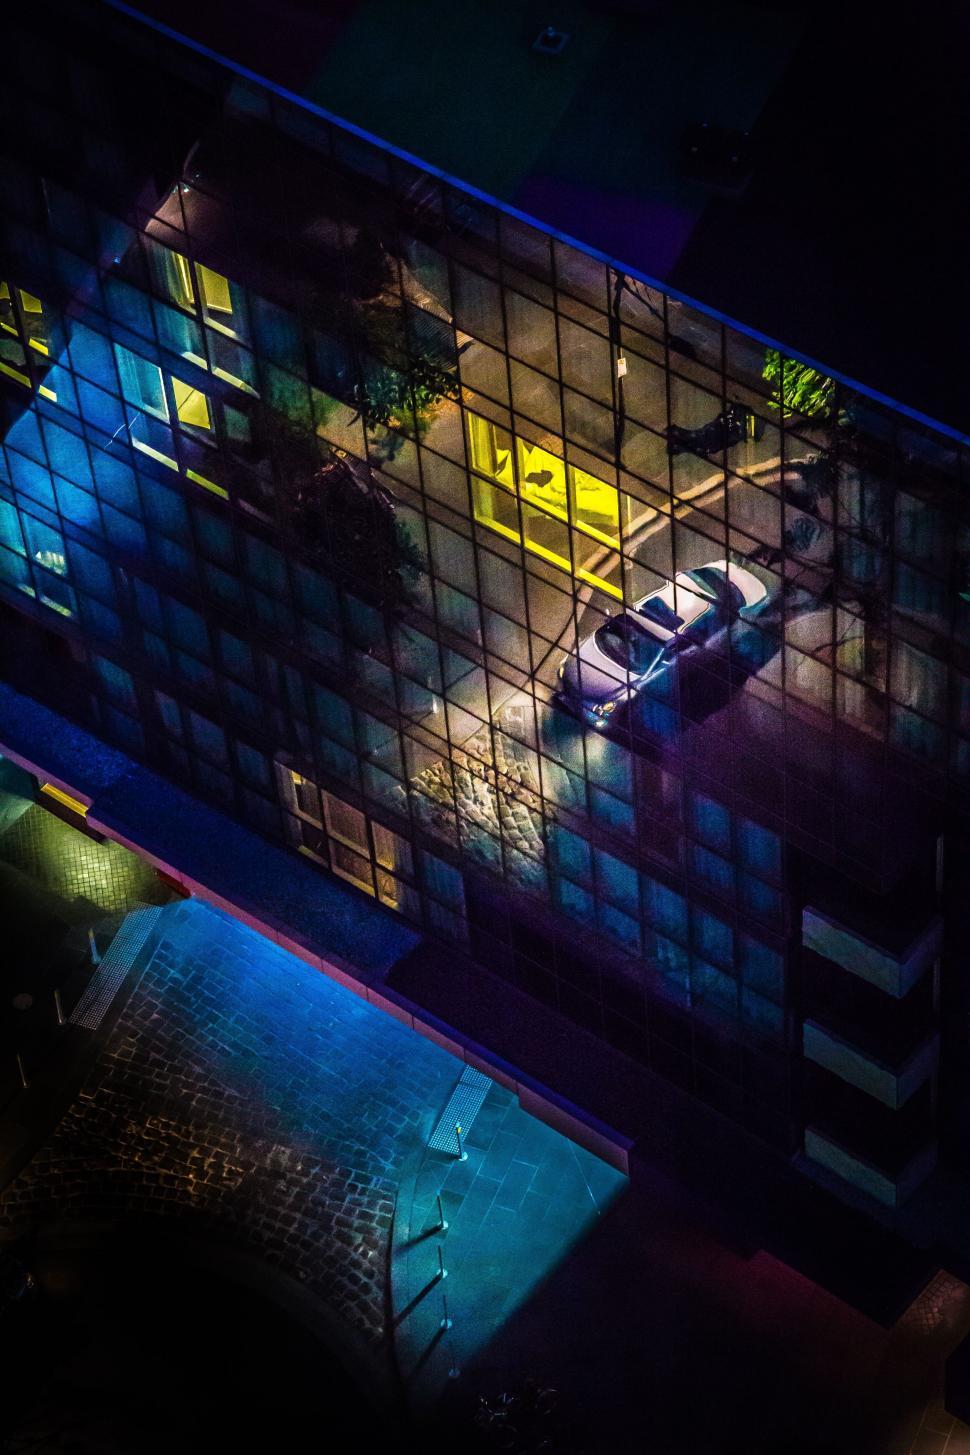 Free Image of Aerial View of Building at Night 